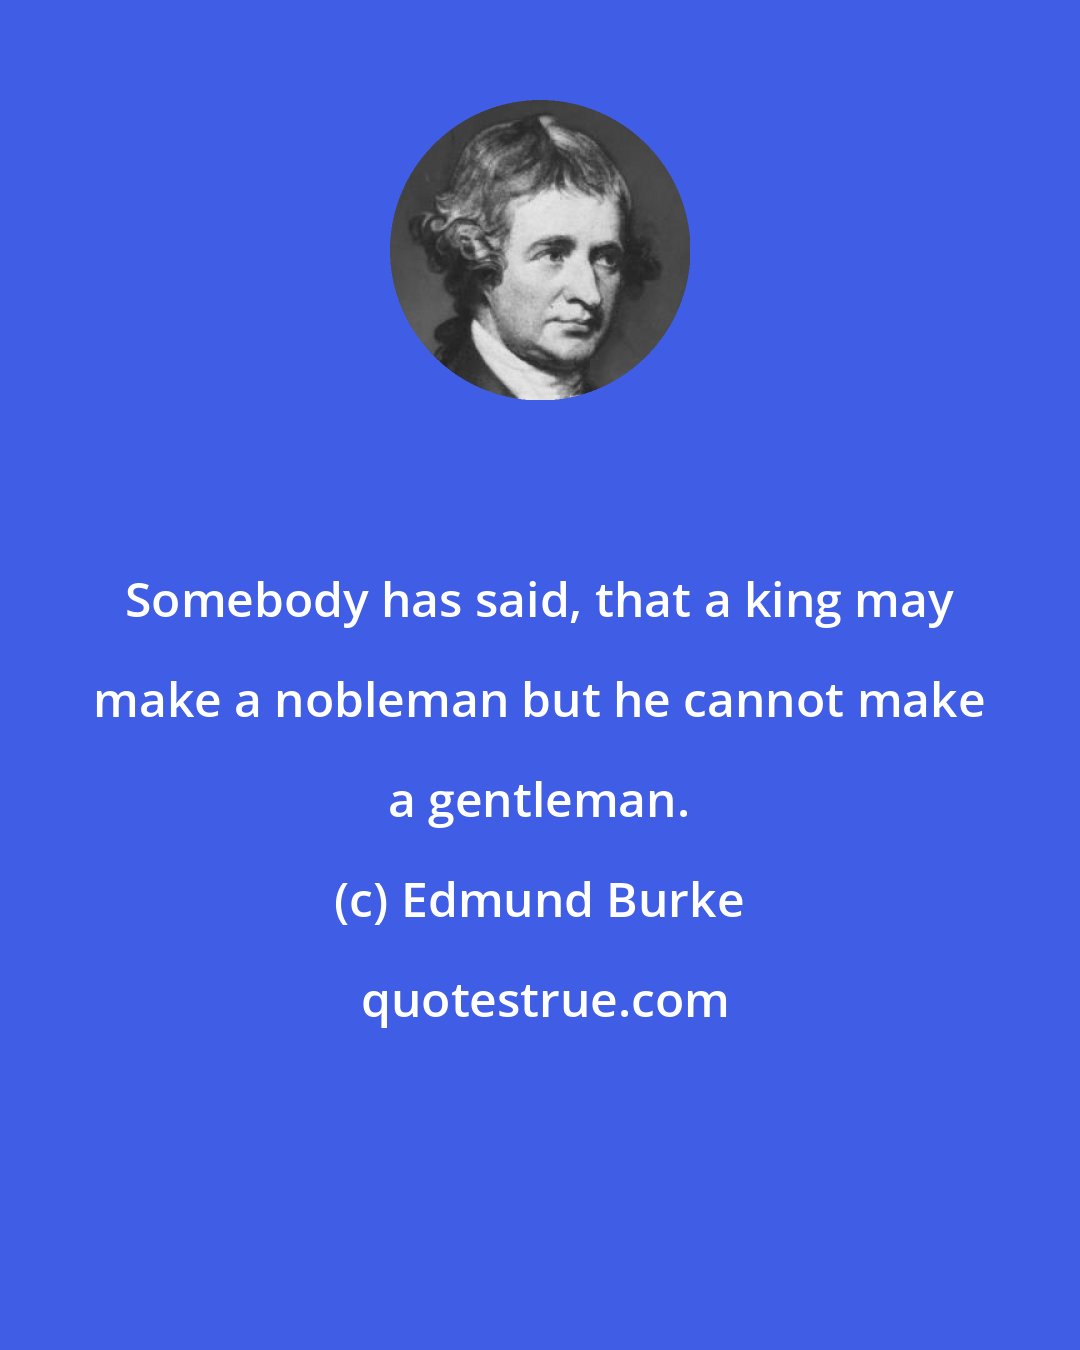 Edmund Burke: Somebody has said, that a king may make a nobleman but he cannot make a gentleman.